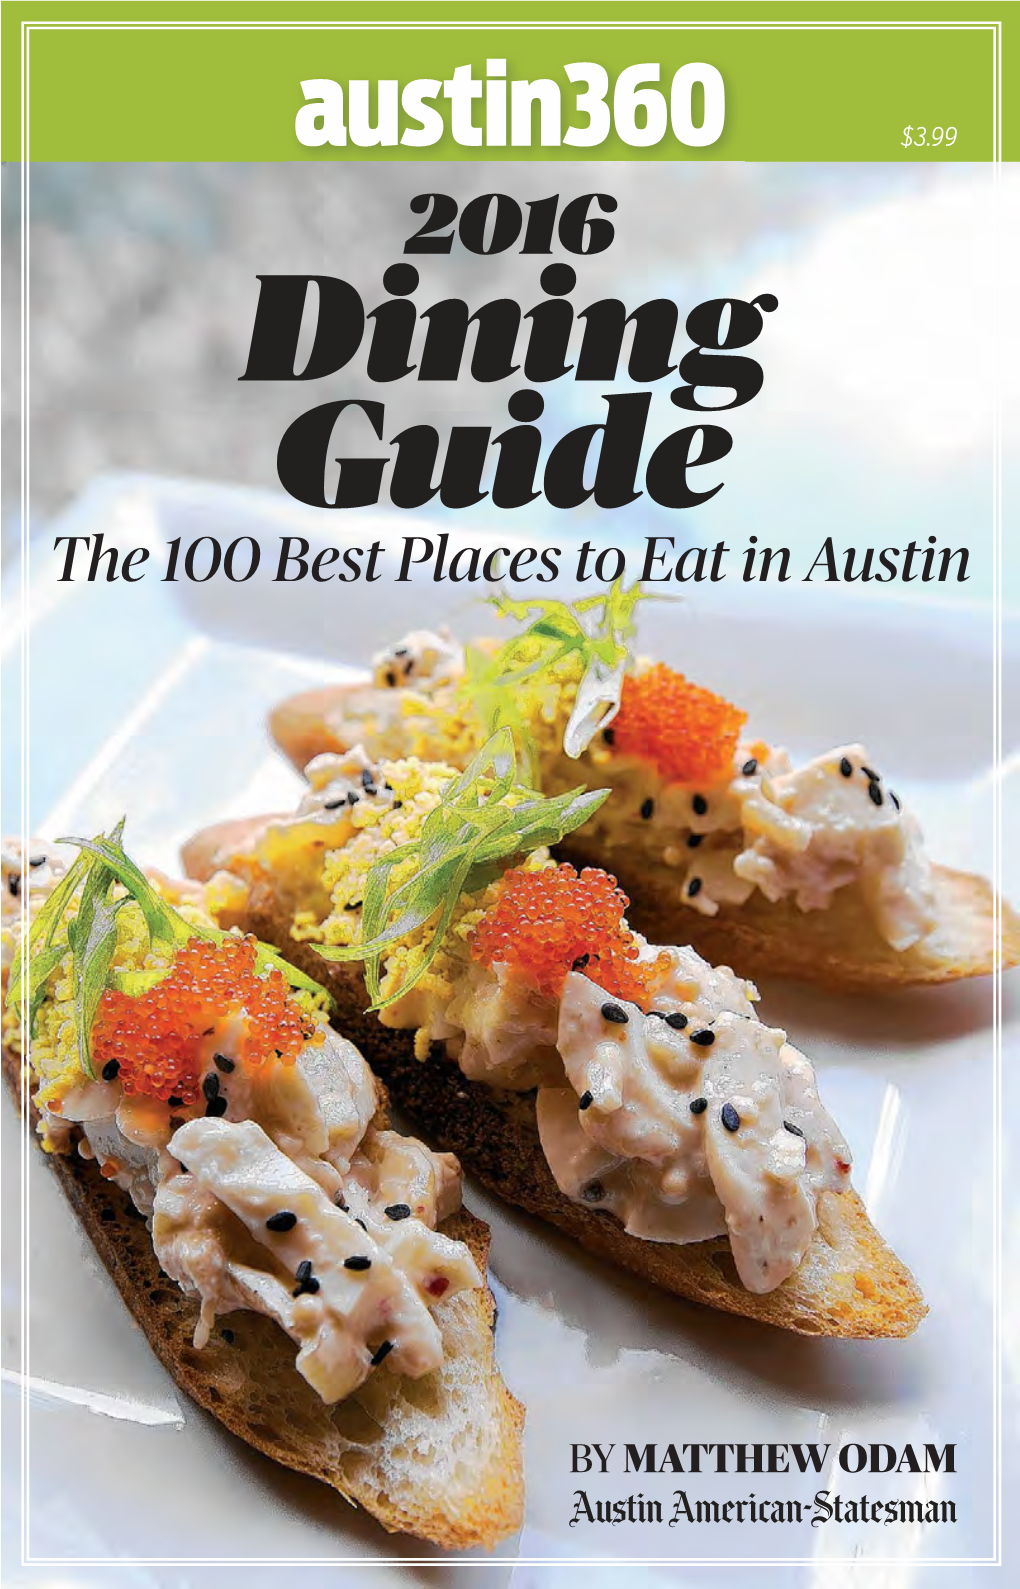 2016 Dining Guide the 100 Best Places to Eat in Austin